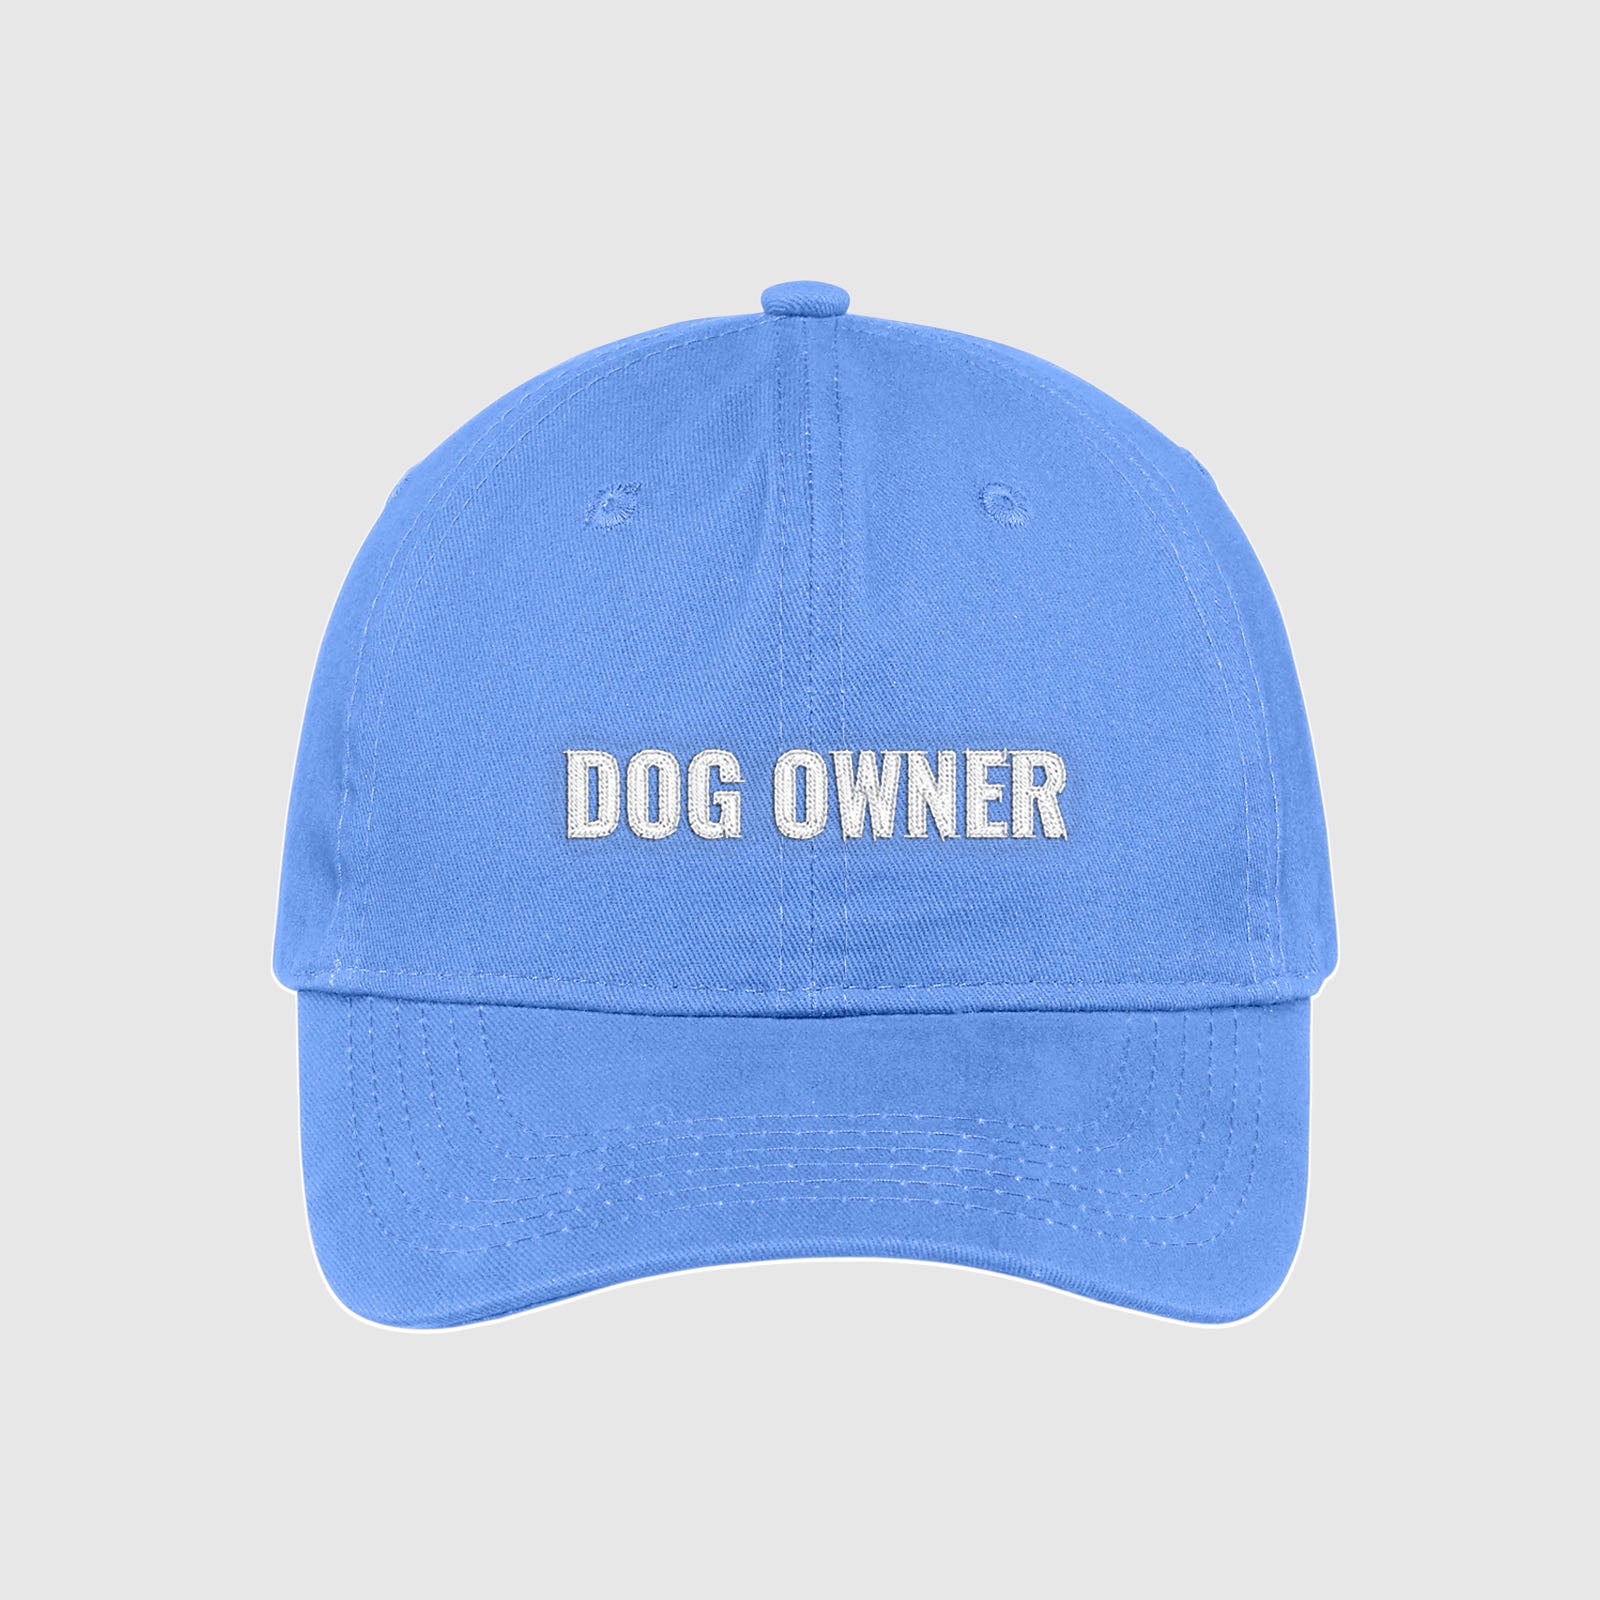 Carolina blue baby blue dad hat with Dog Owner embroidered on the front with white thread.